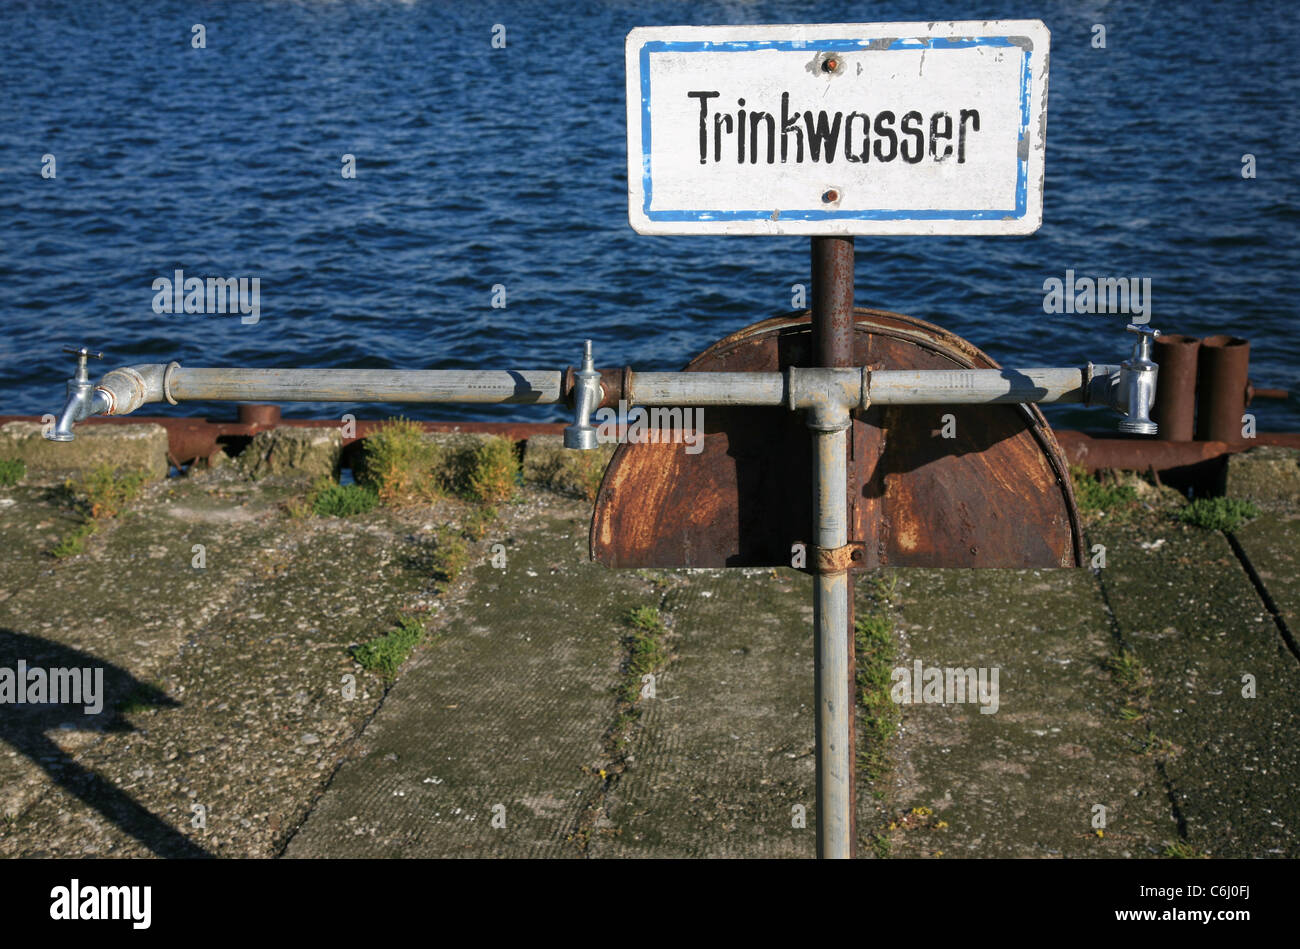 Sign with three faucets and water in the background. The German word 'Trinkwasser' on the sign means 'potable water' in English. Stock Photo